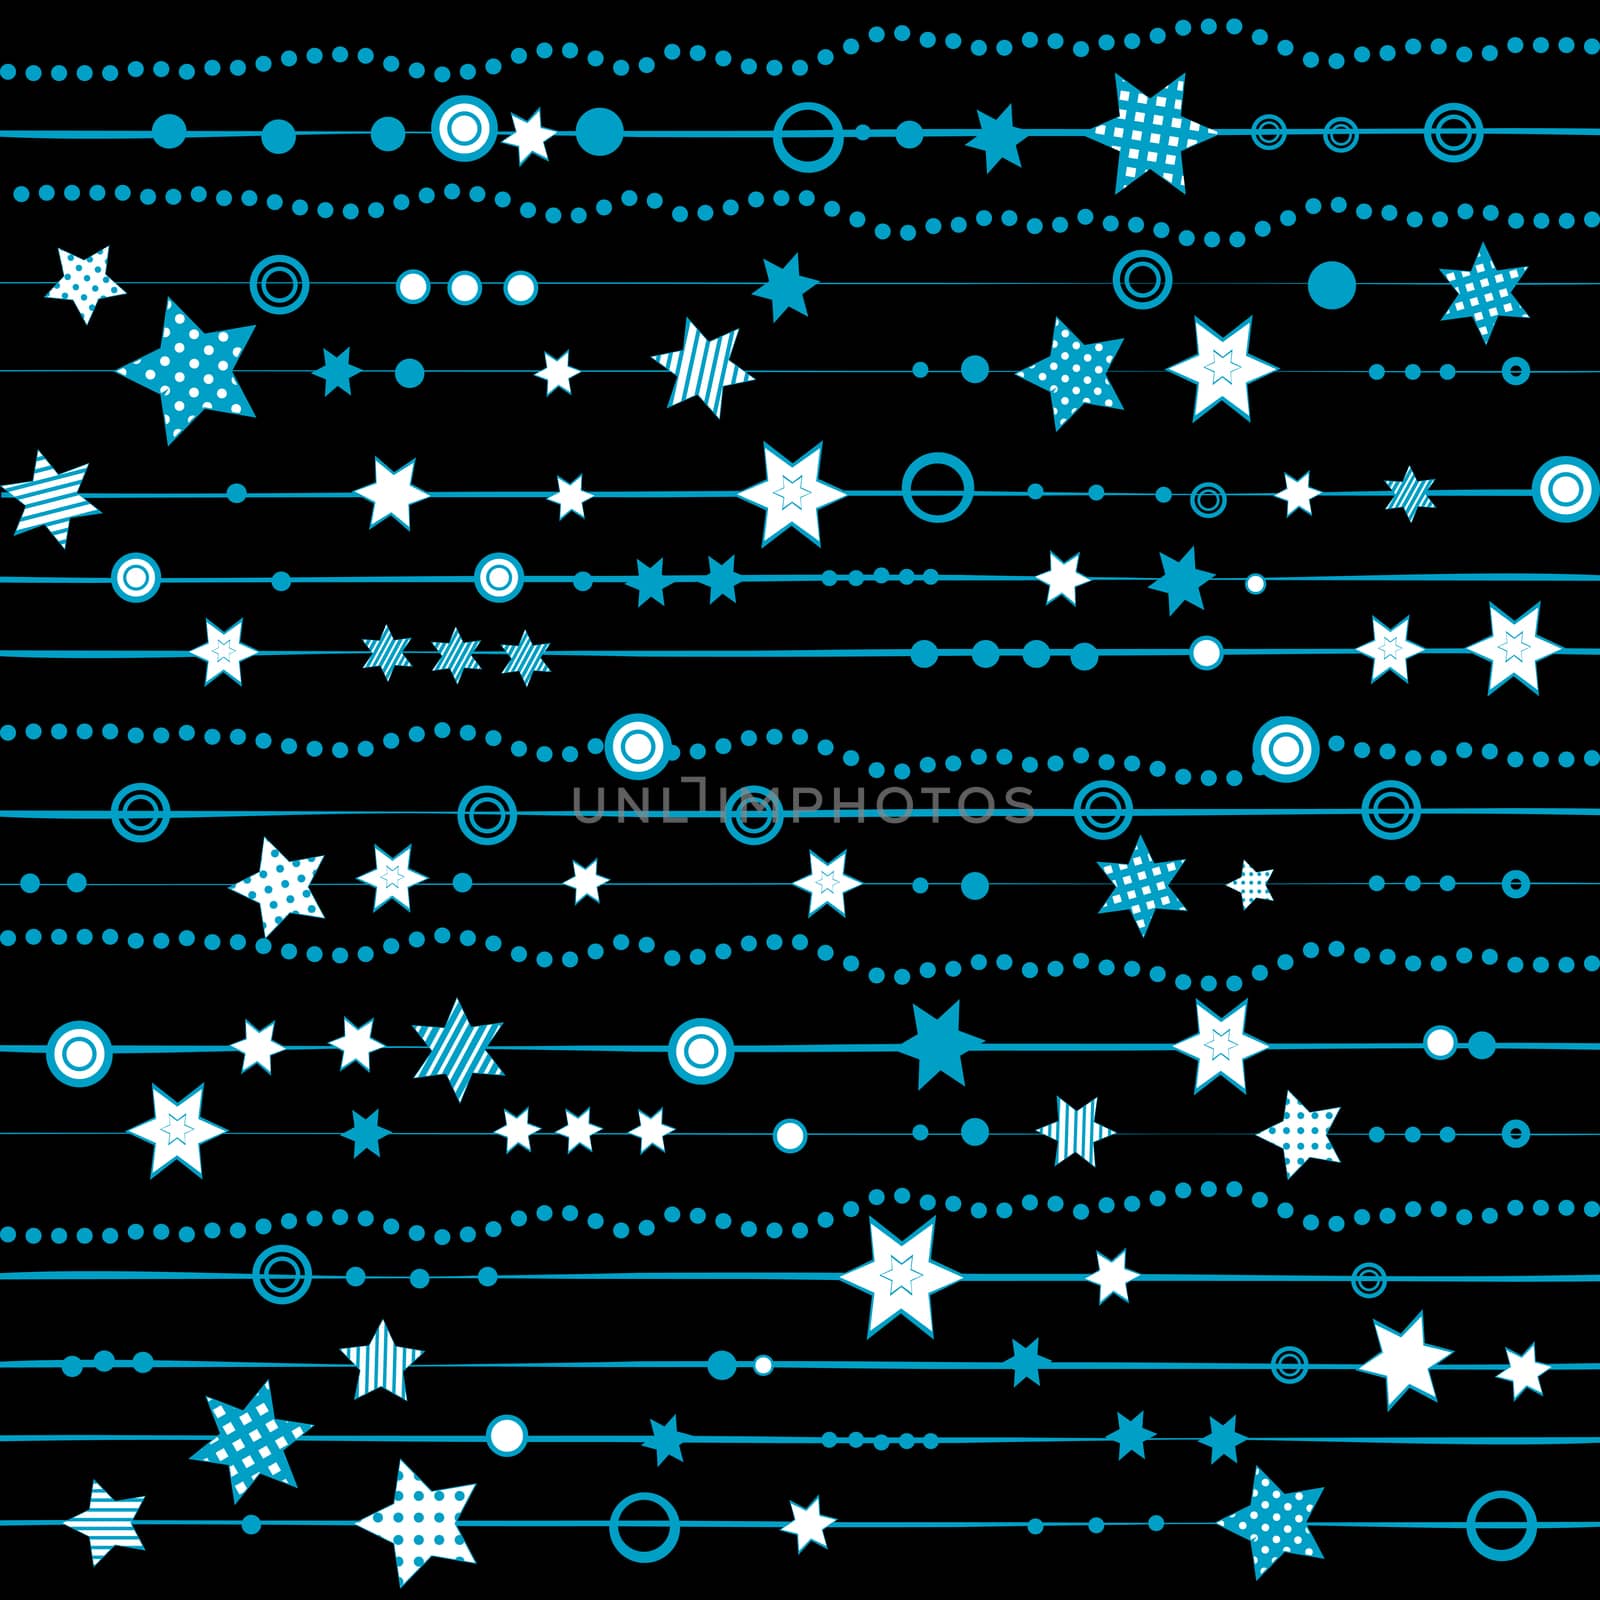 Blue garland with stars and dots over black background